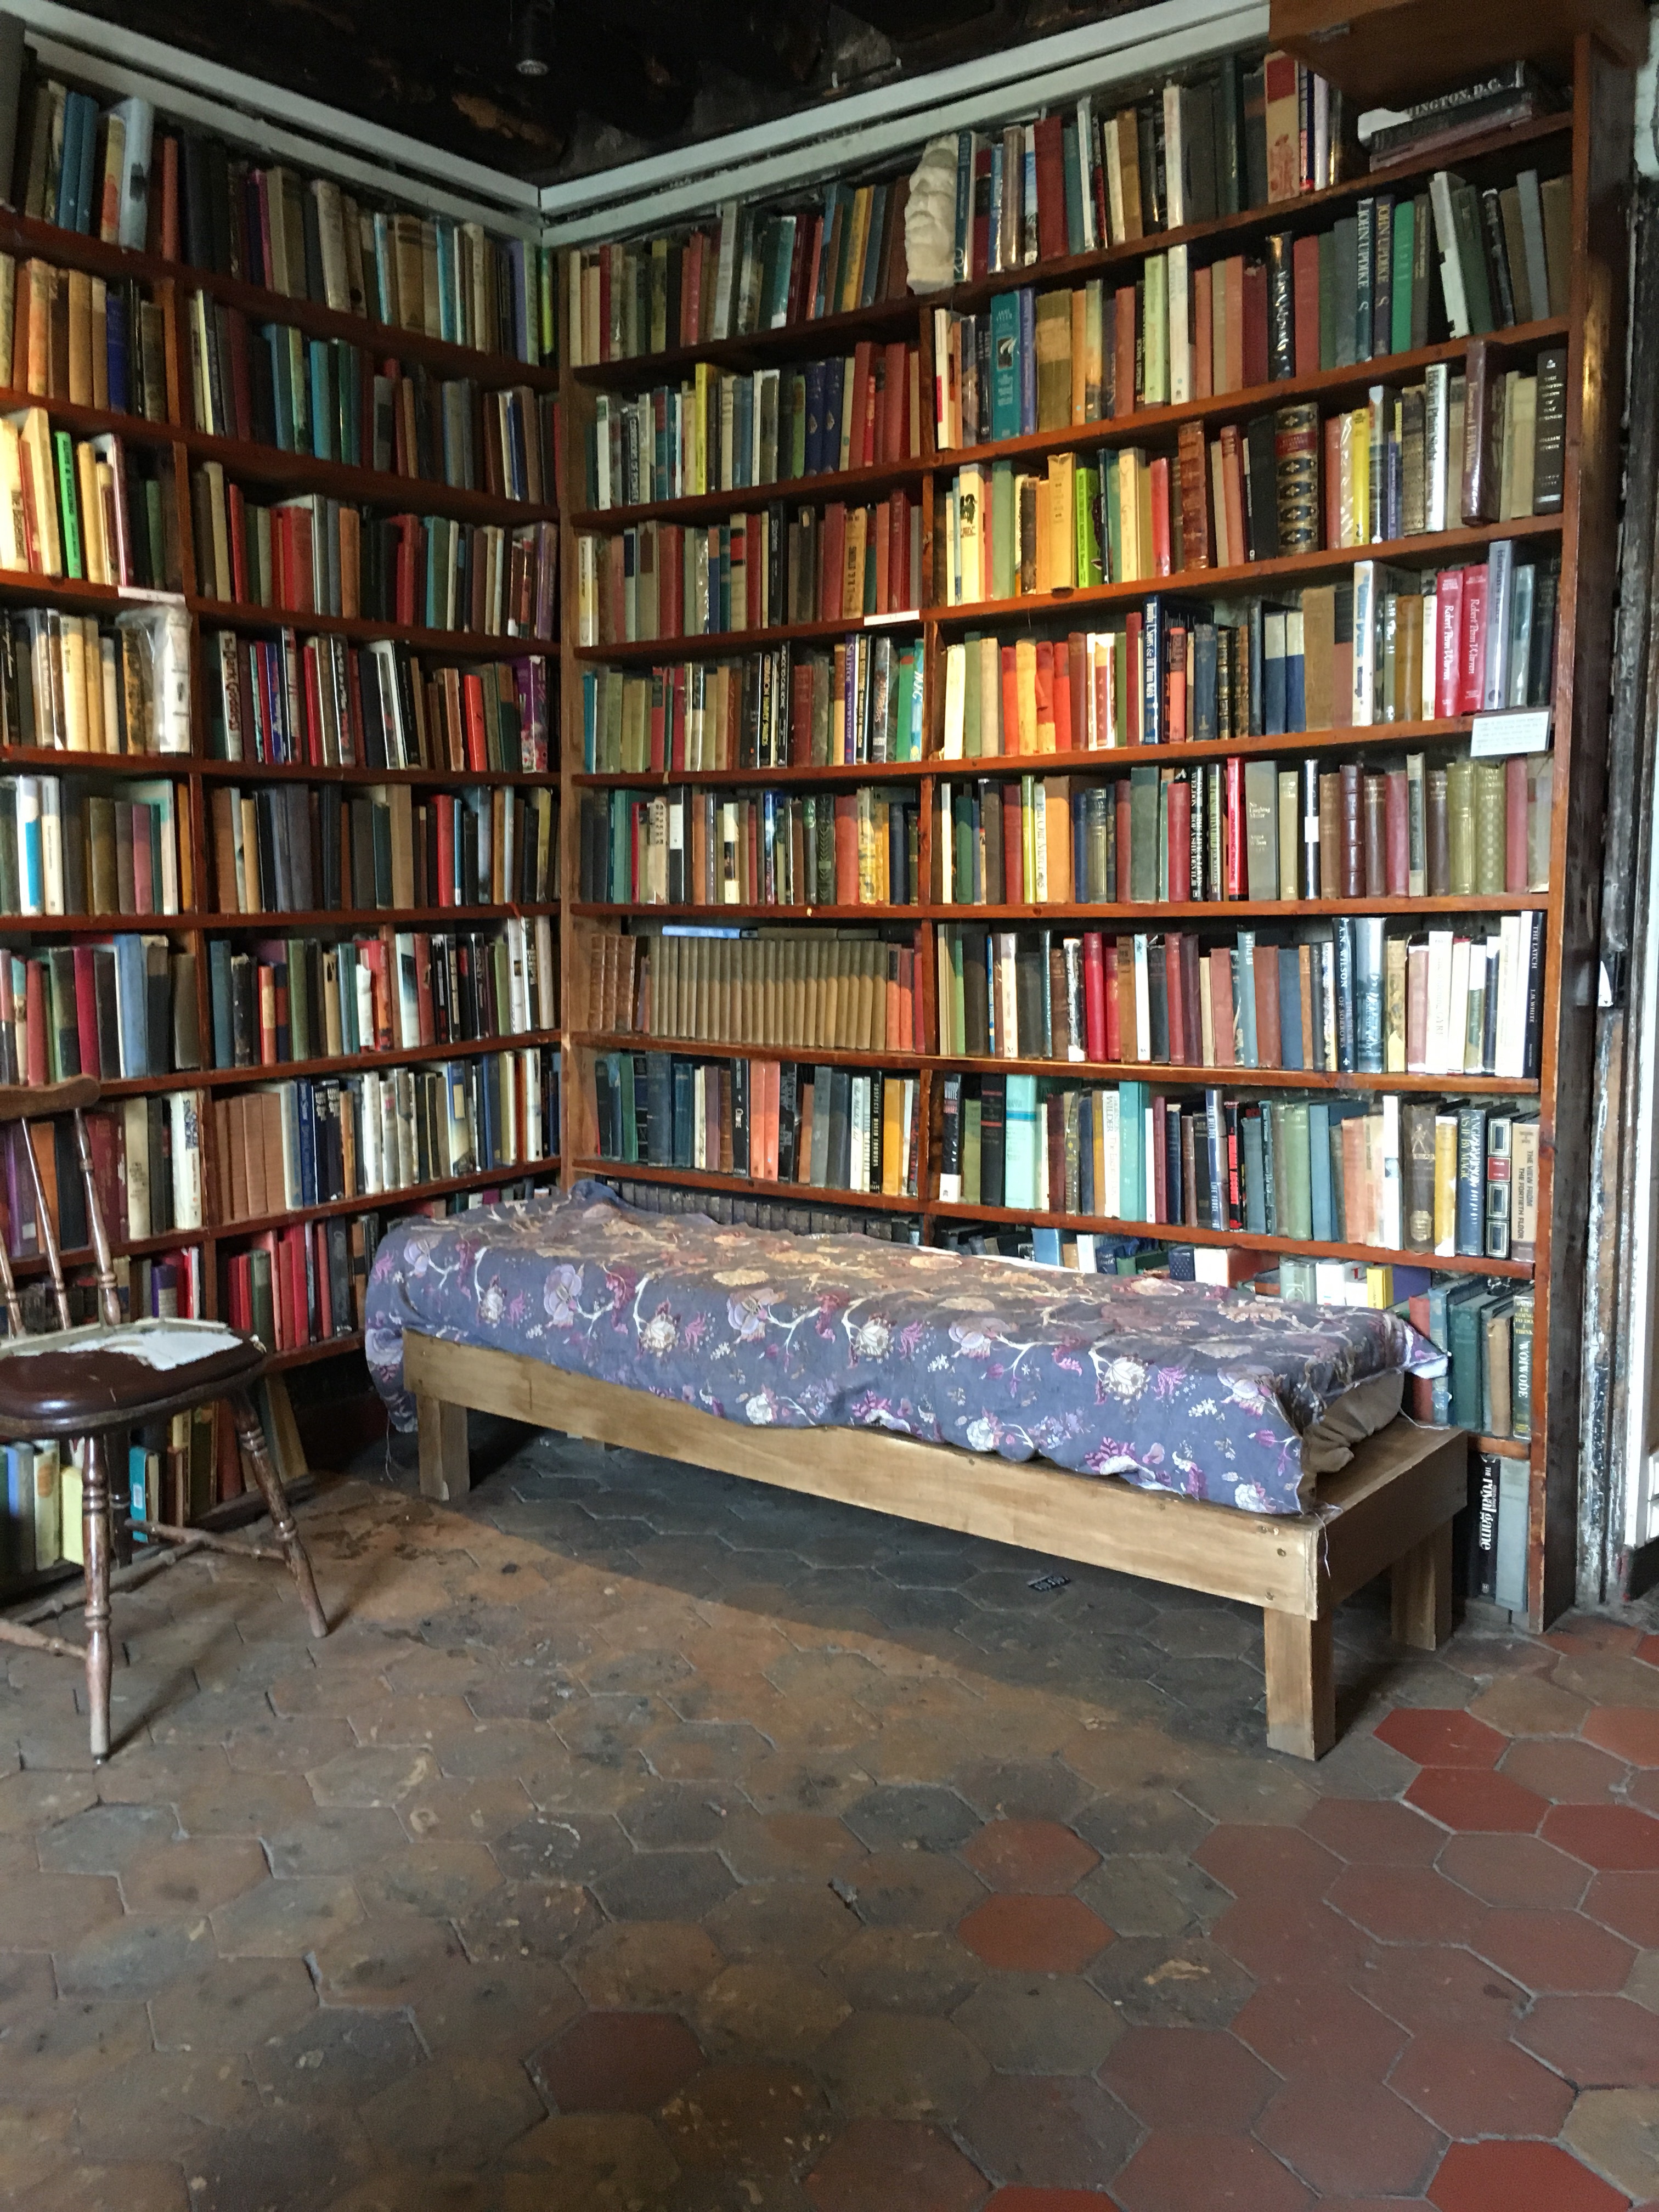 Shakespeare & Co, Paris - visitors can sleep with the books